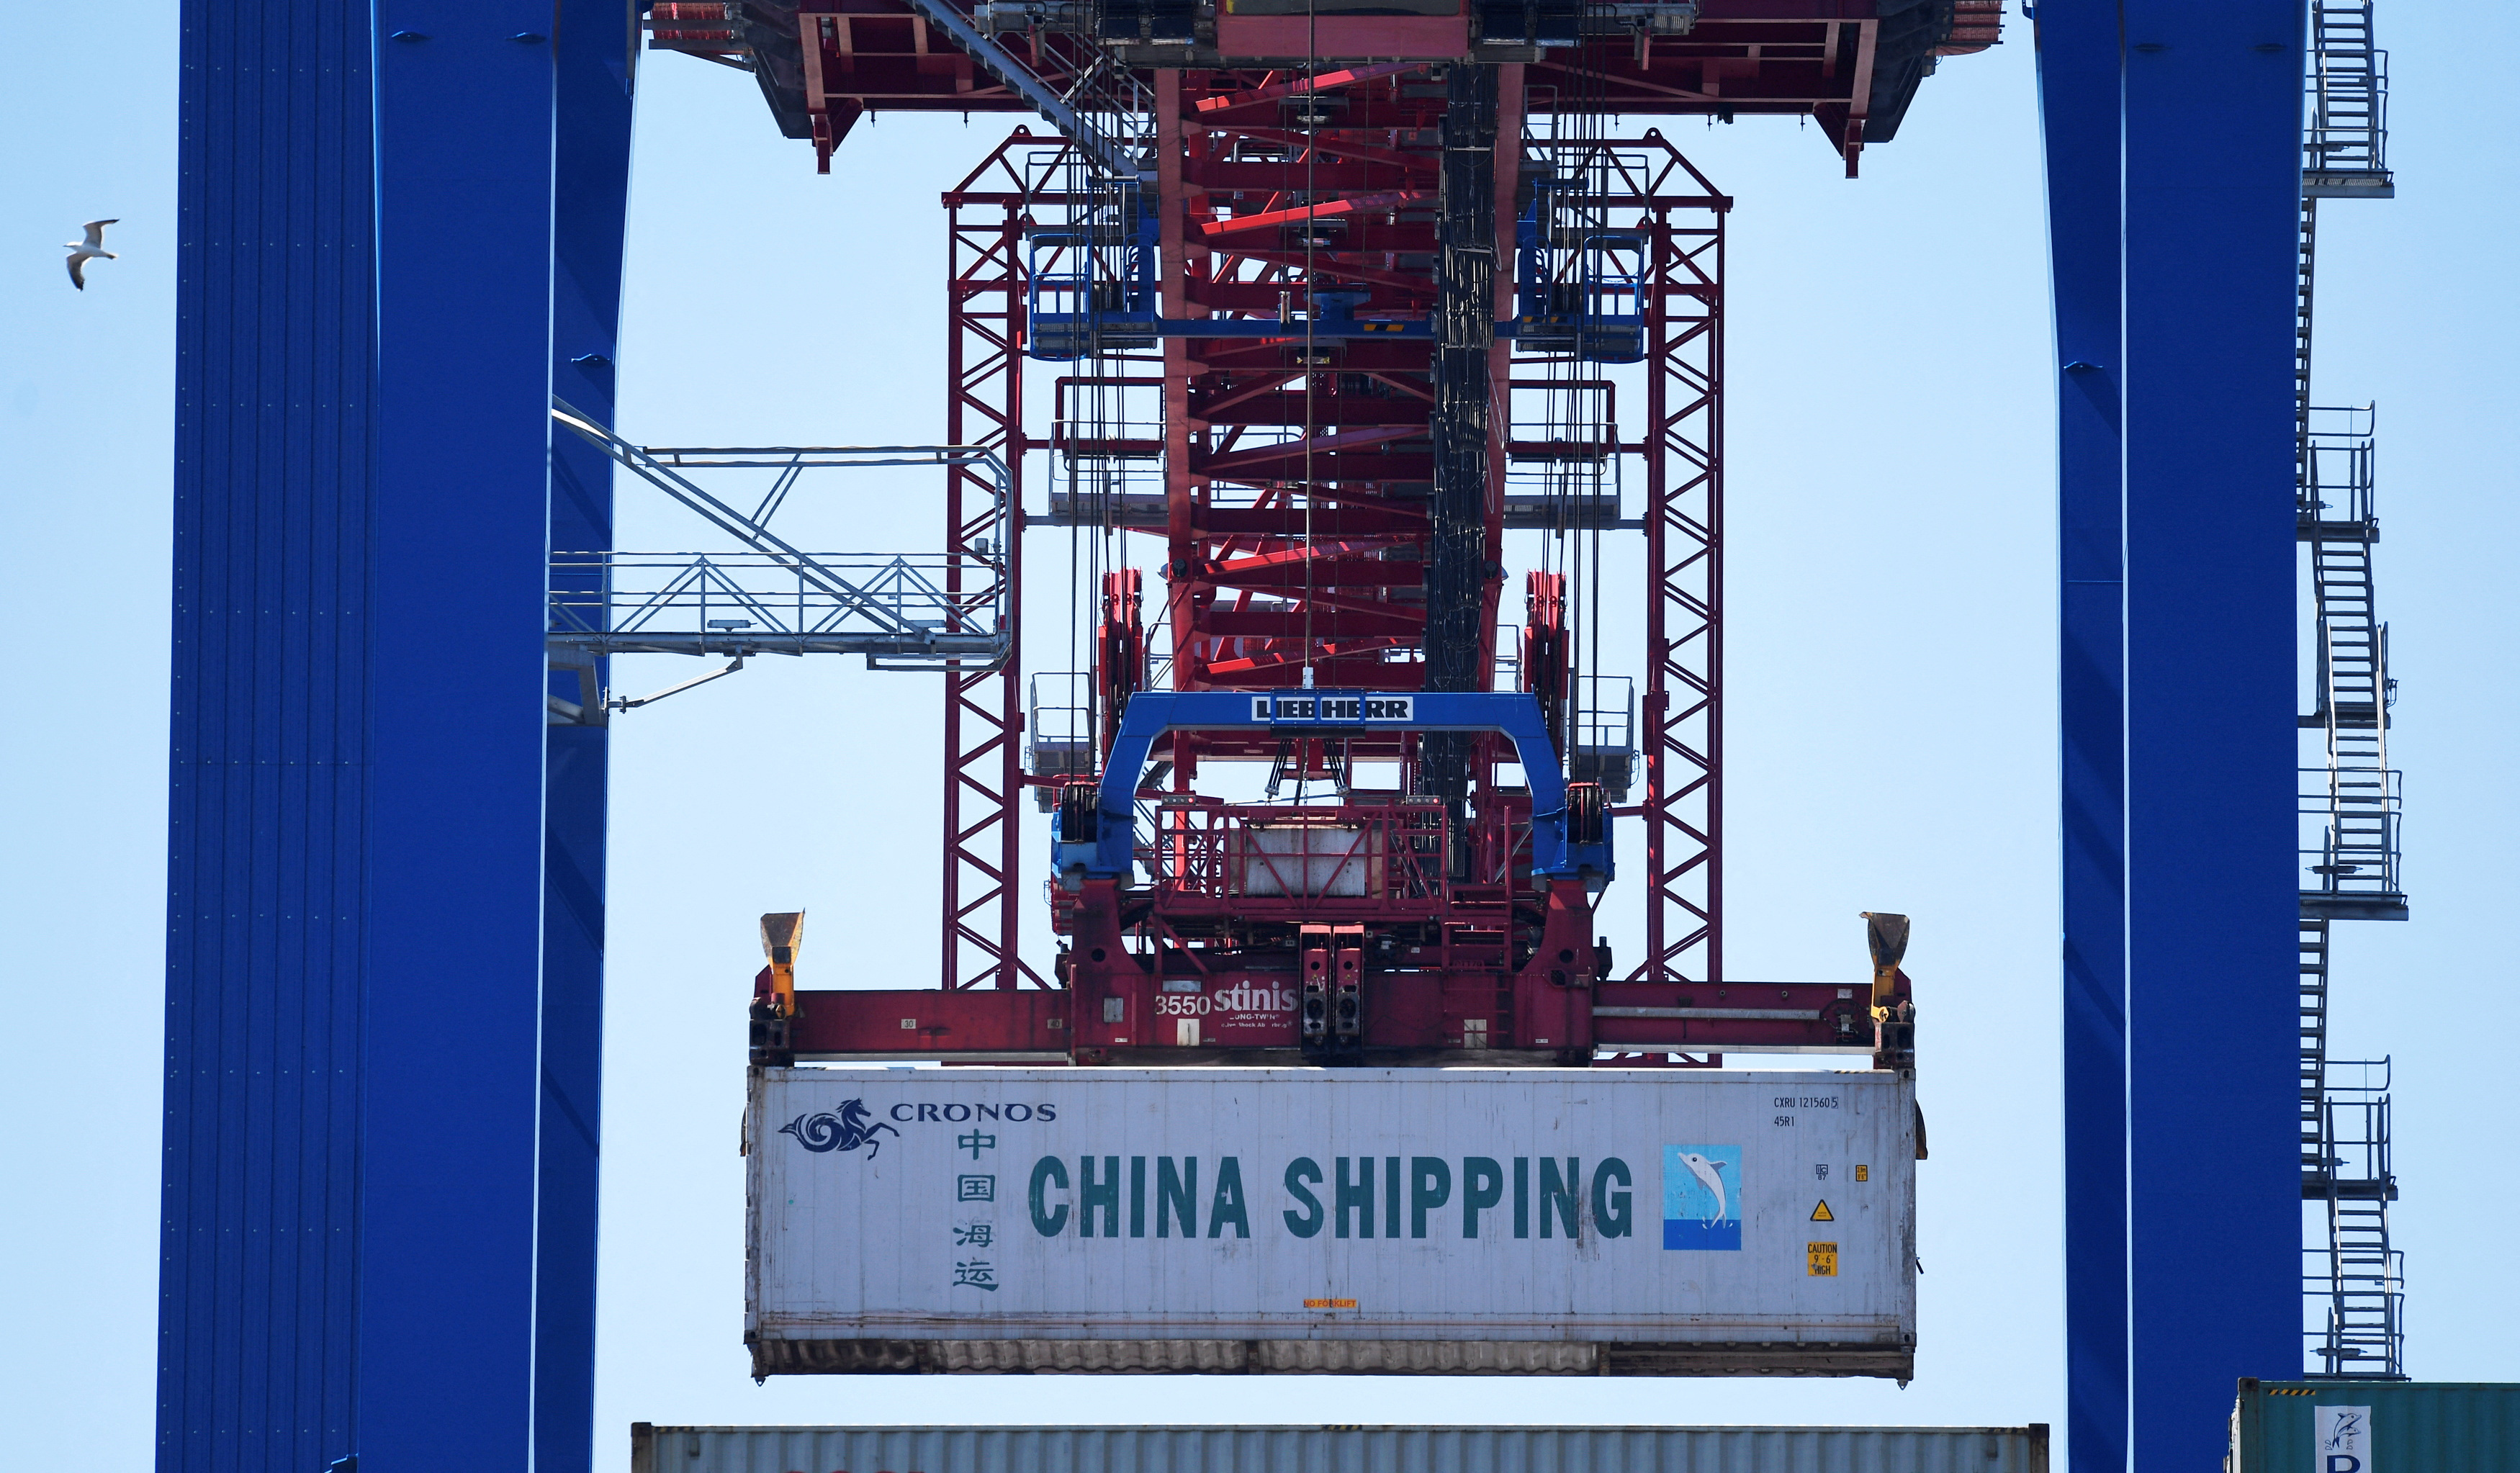 A container of China Shipping is loaded at a loading terminal in the port of Hamburg